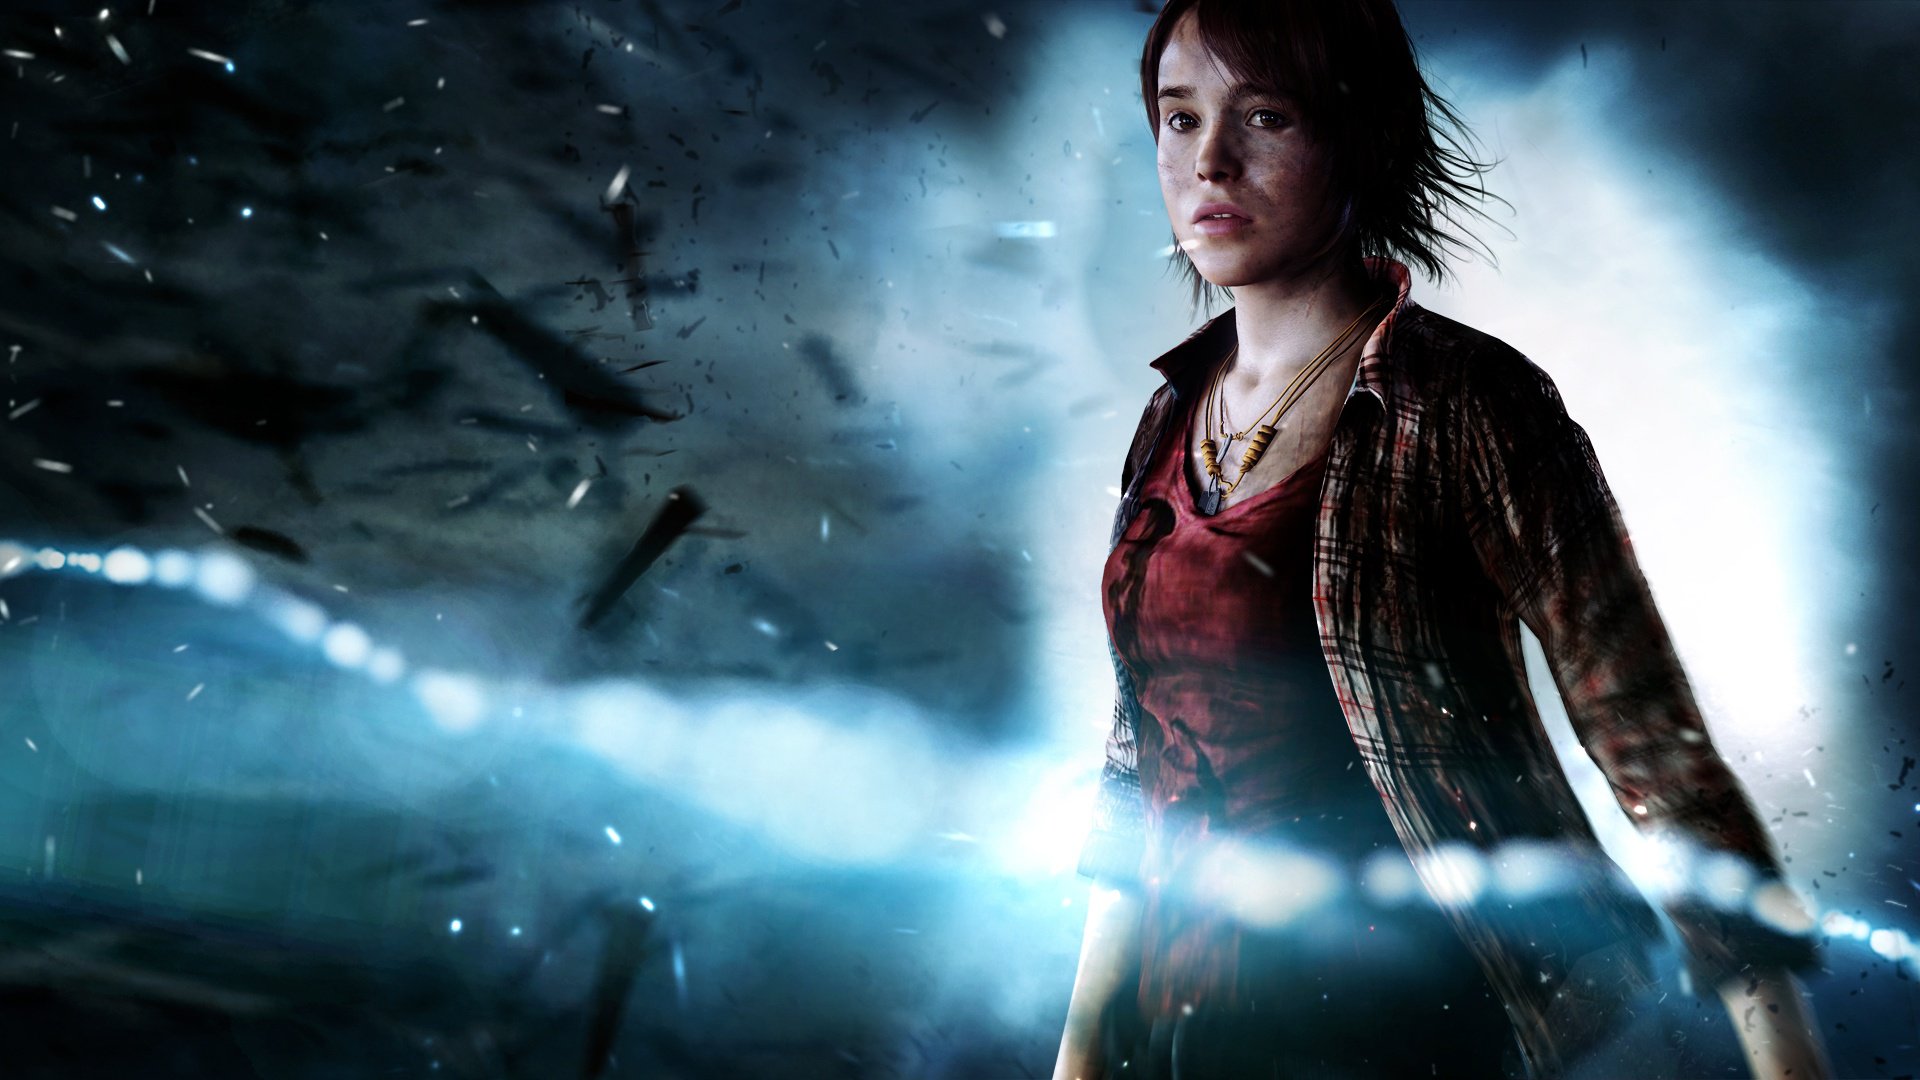 Beyond: Two Souls Backgrounds, Compatible - PC, Mobile, Gadgets| 1920x1080 px